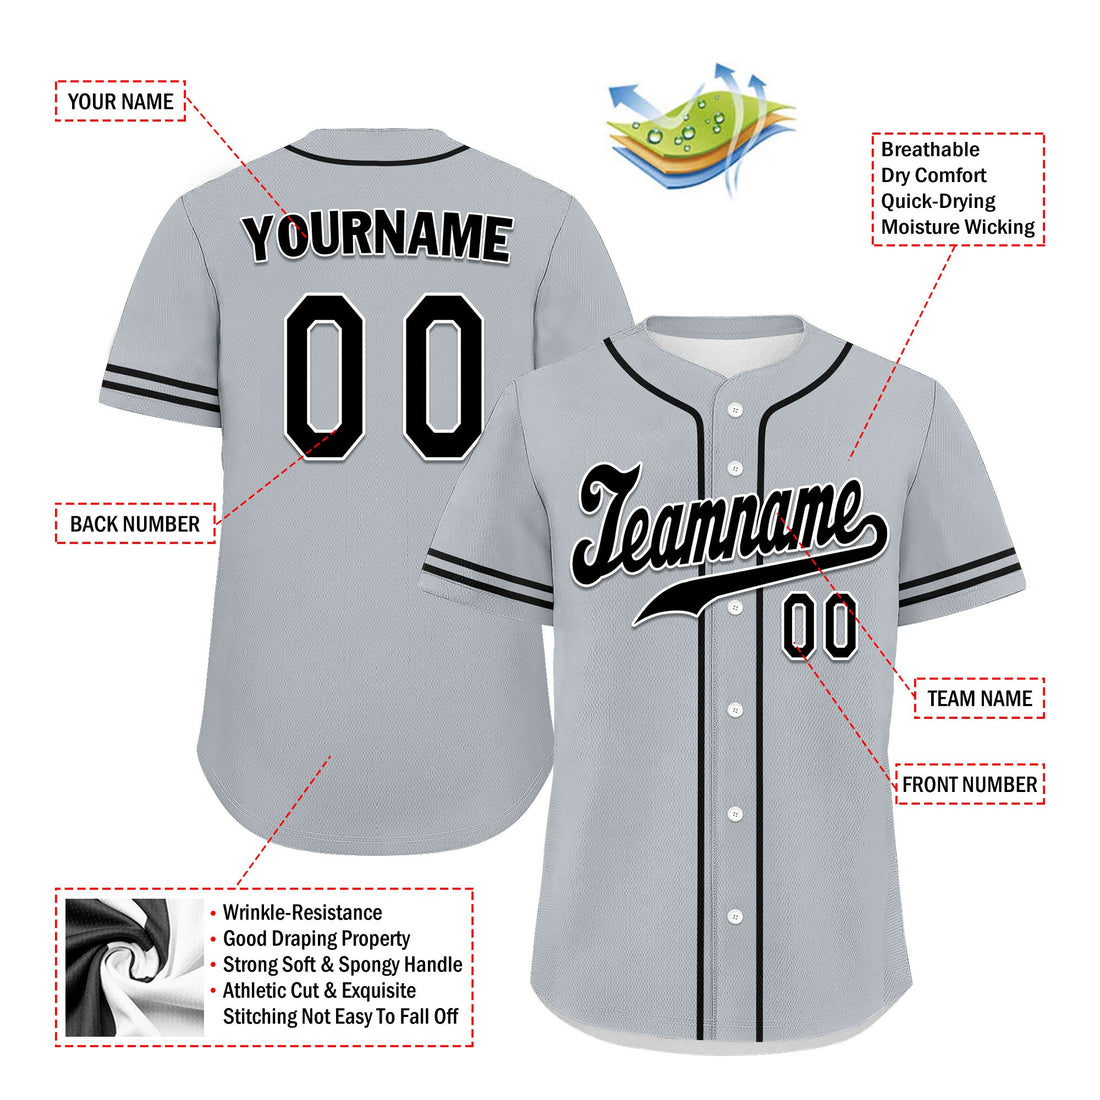 Custom Grey Classic Style Black Personalized Authentic Baseball Jersey UN002-bd0b00d8-d